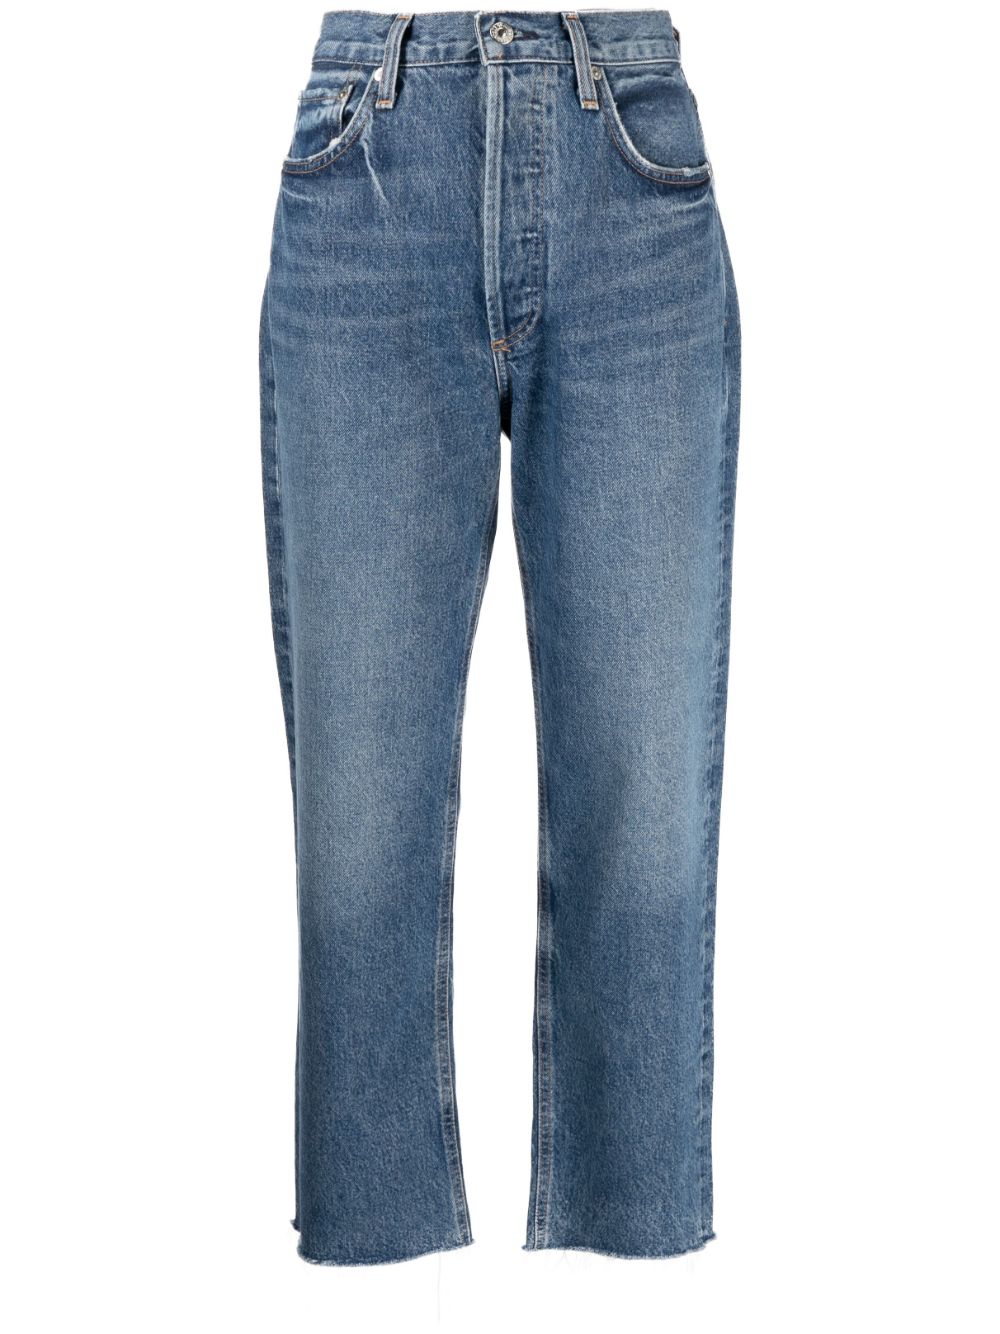 Citizens of Humanity Florence wide-leg jeans - Blue von Citizens of Humanity